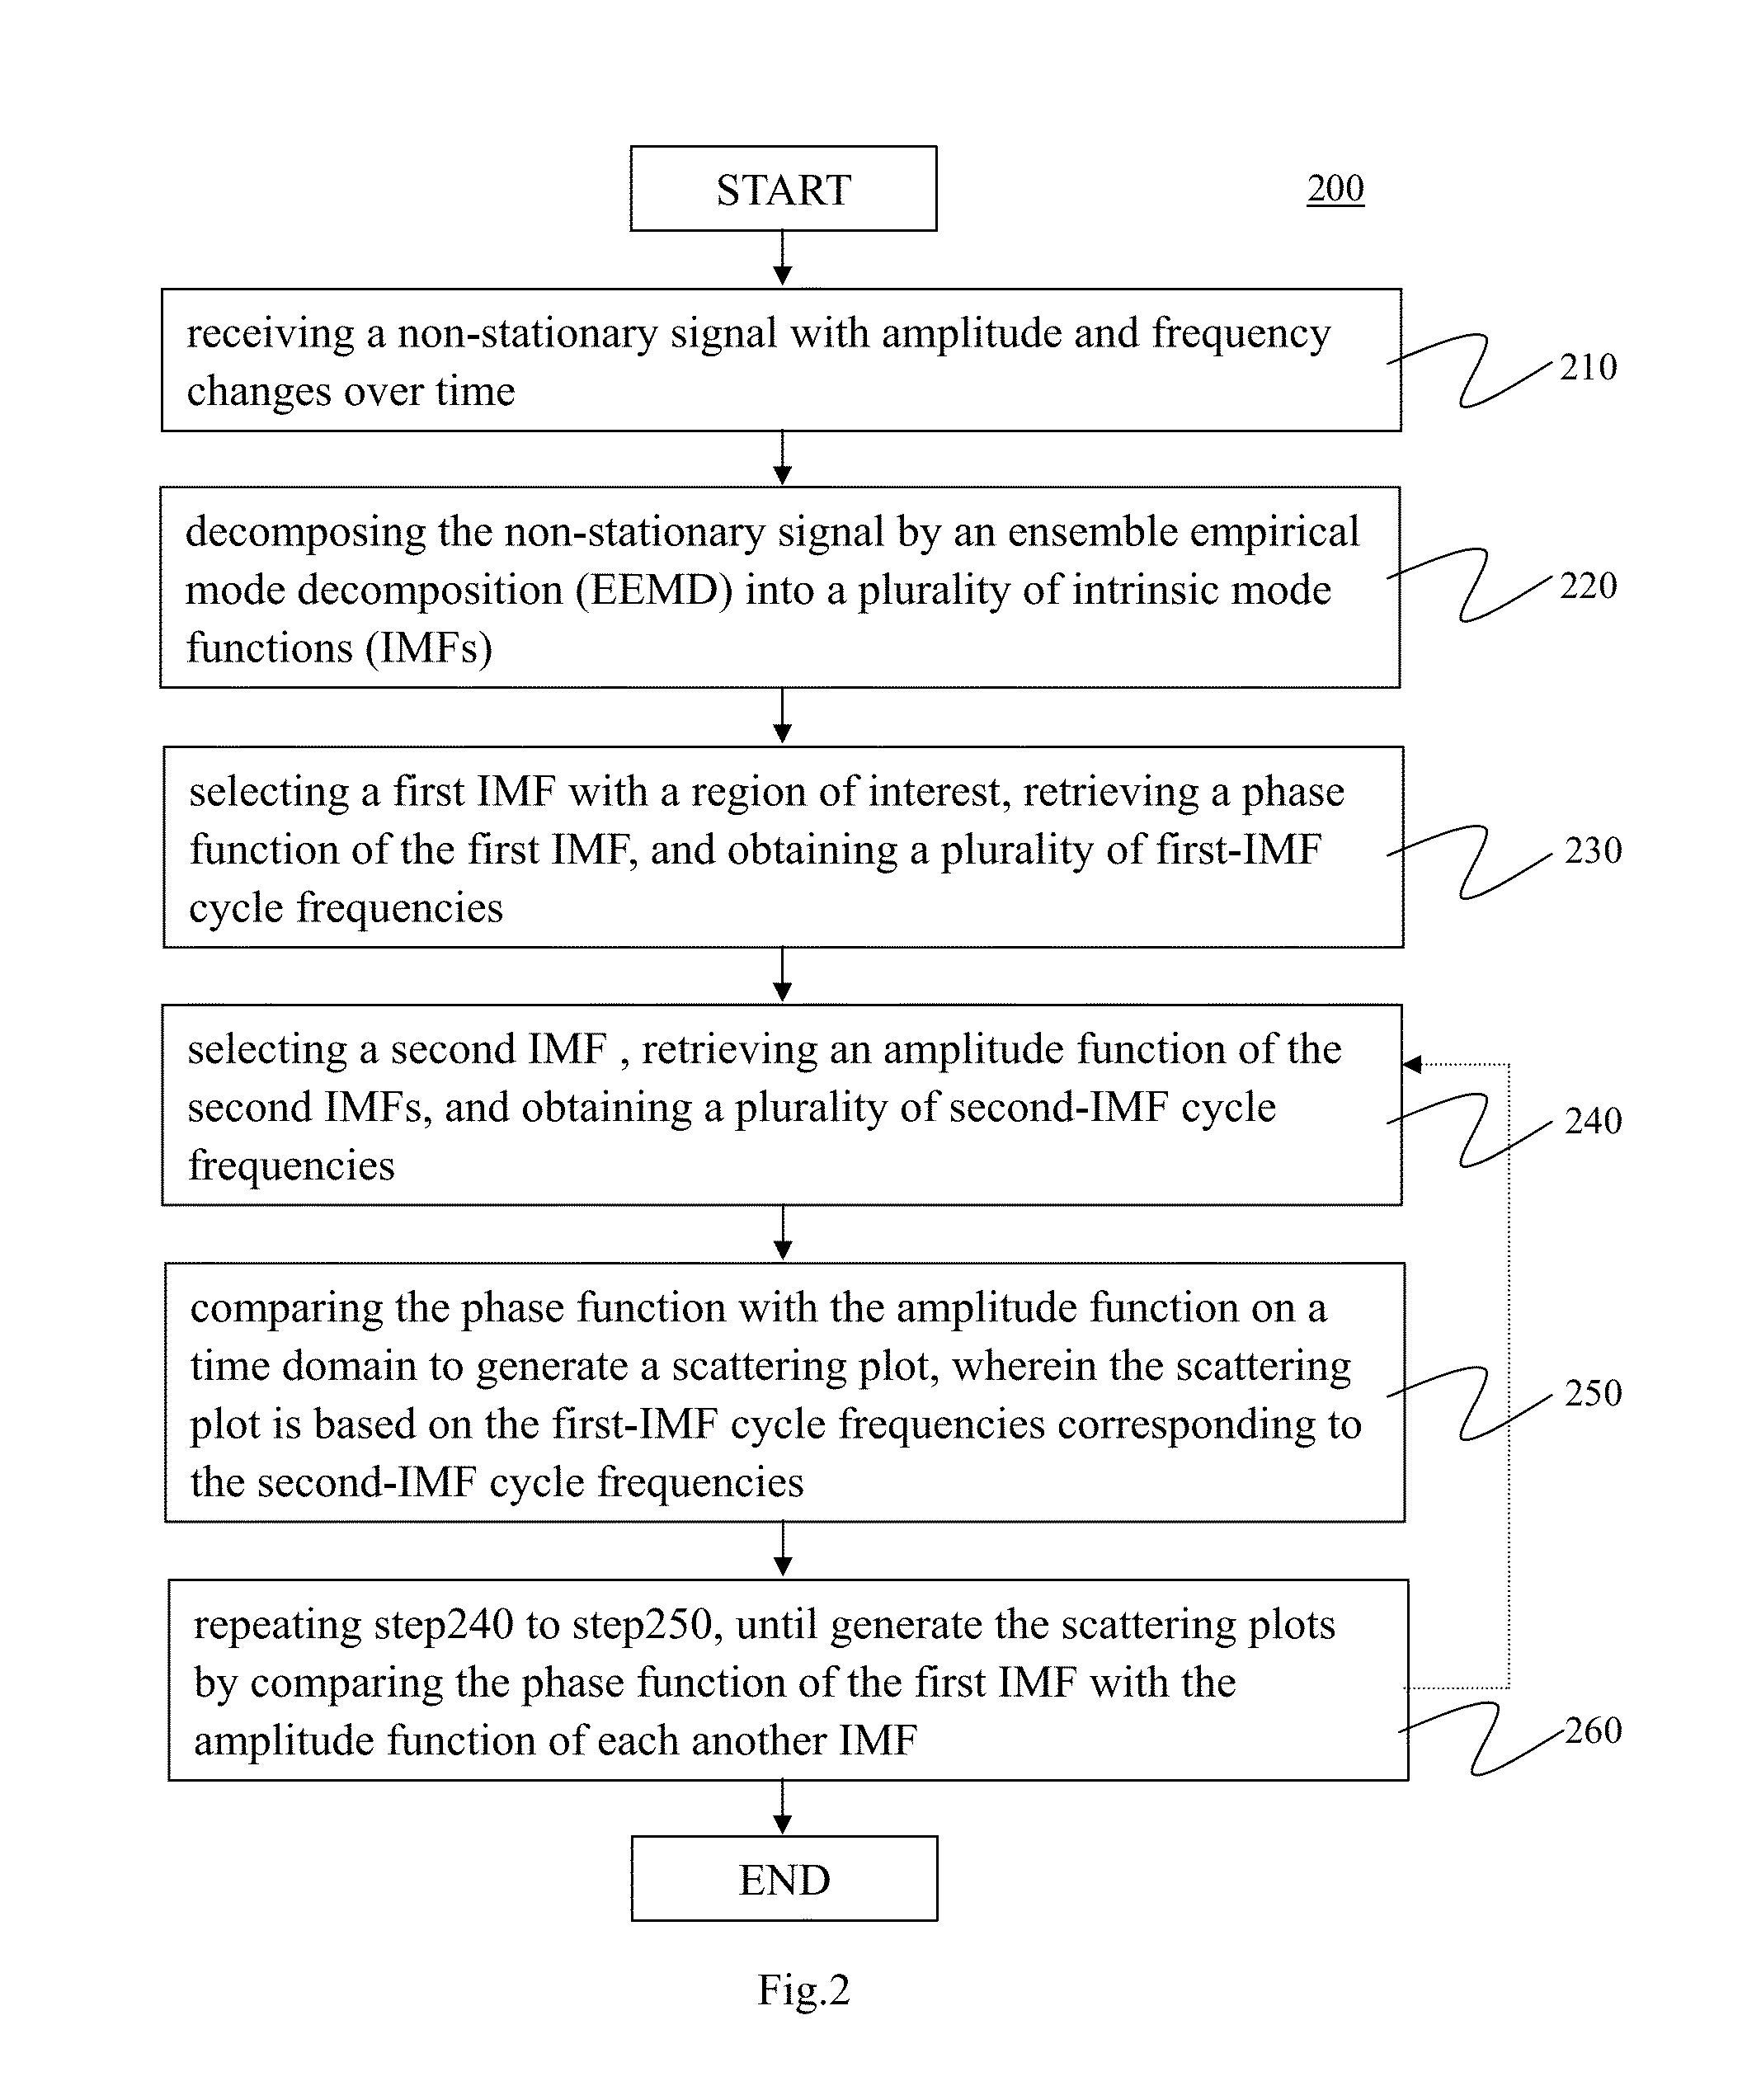 Method and System of Signal Processing for Phase-Amplitude Coupling and Amplitude-Amplitude coupling